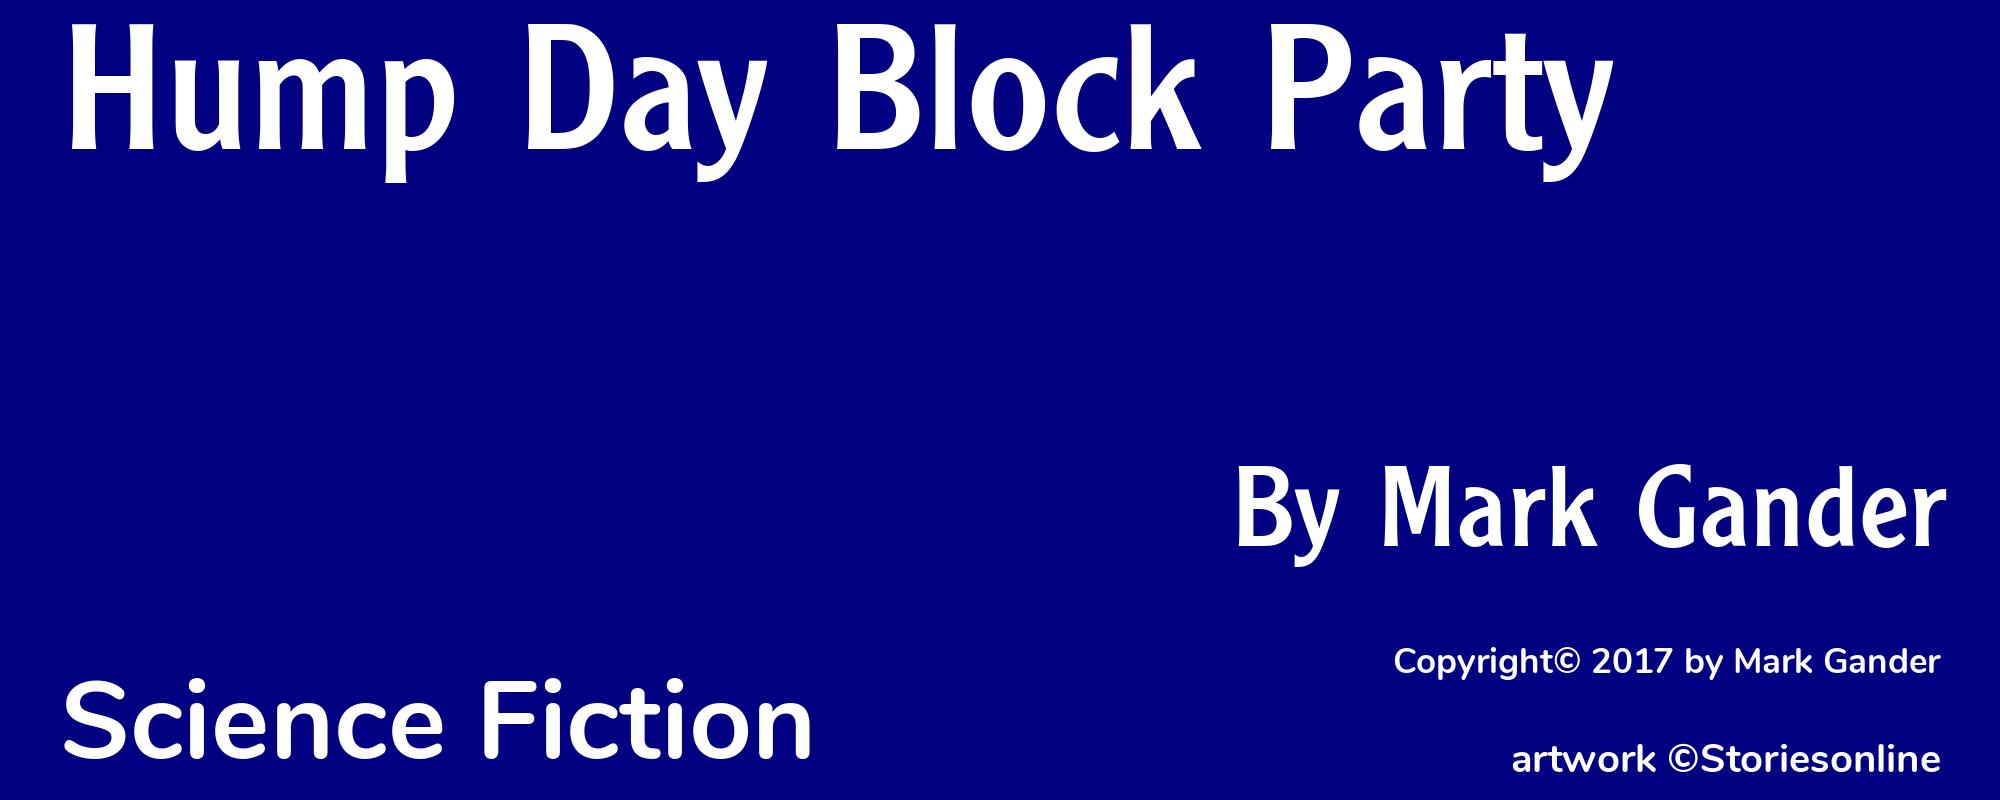 Hump Day Block Party - Cover